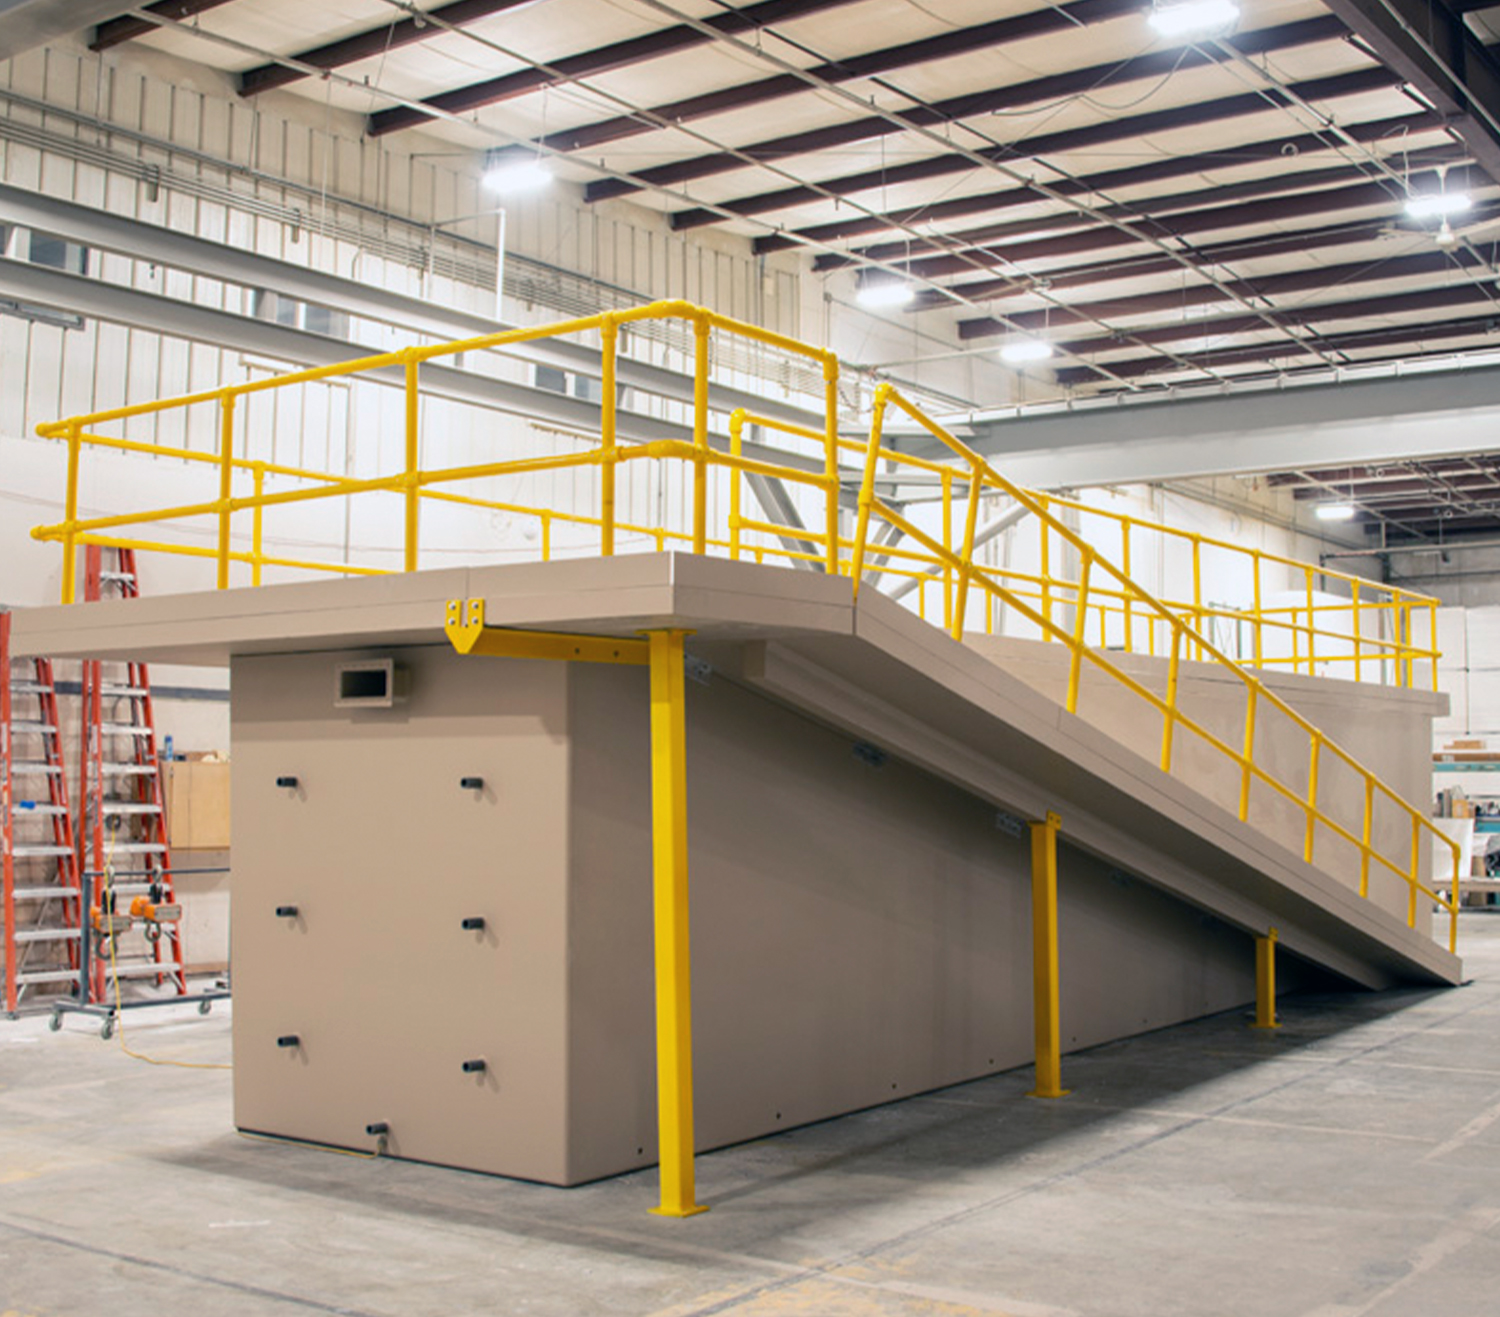 DuraFiber rectangular composite tanks can be equipped with safety railings and other options